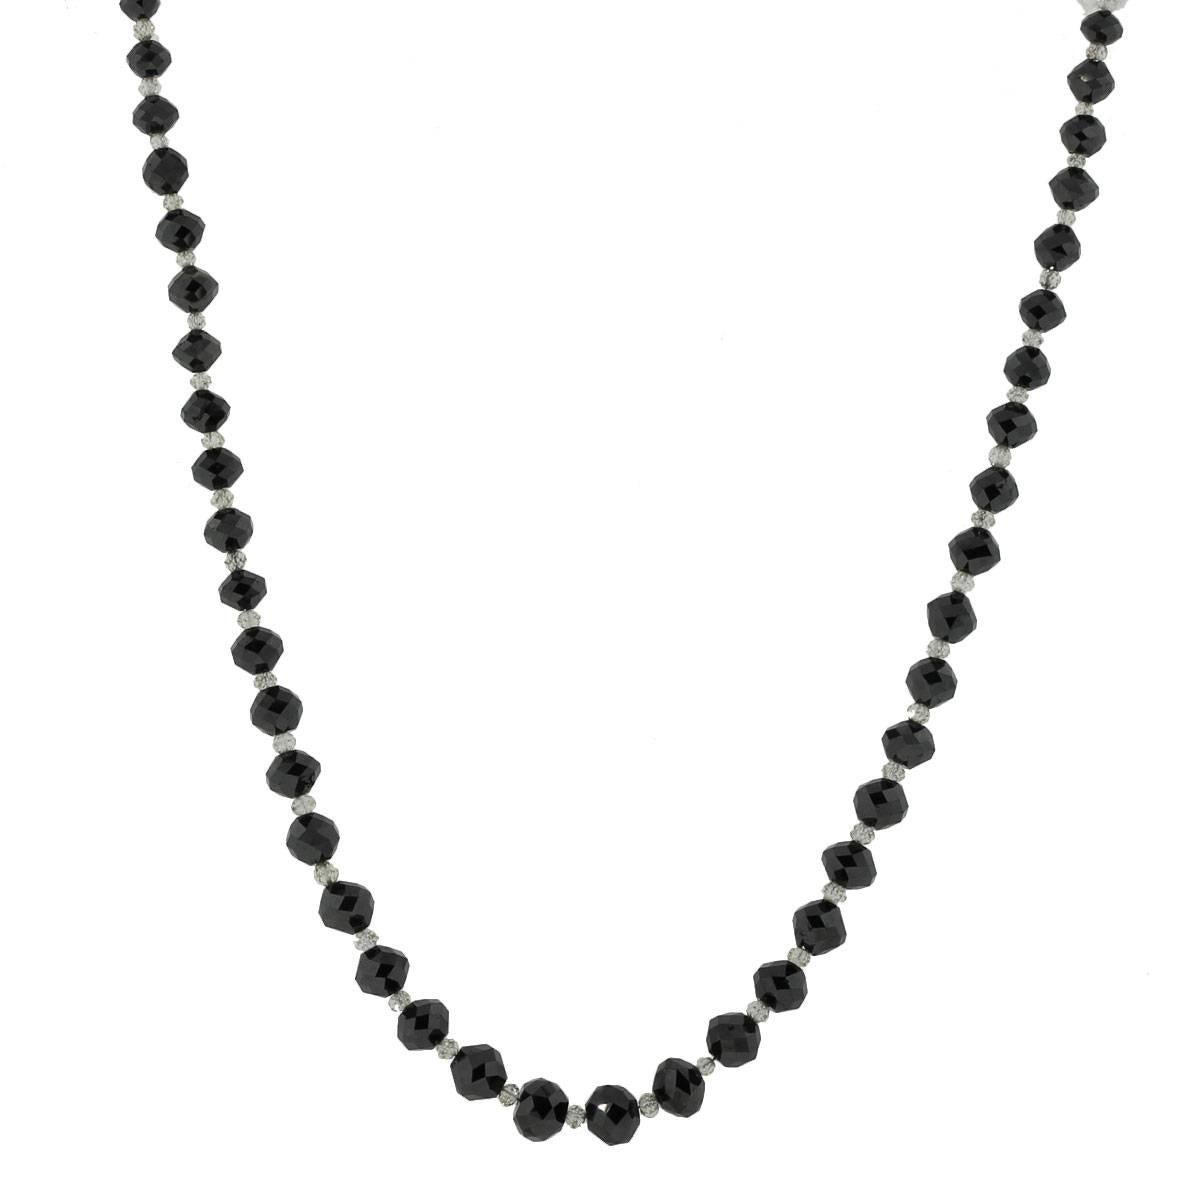 Material: 18k white gold
Diamond Details: Approximately 80ctw of black and white briolette shape diamonds. White diamonds are G/H in color and SI in clarity
Necklace Measurements: 16.50″
Clasp: Tongue in box clasp with safety latch
Total Weight: